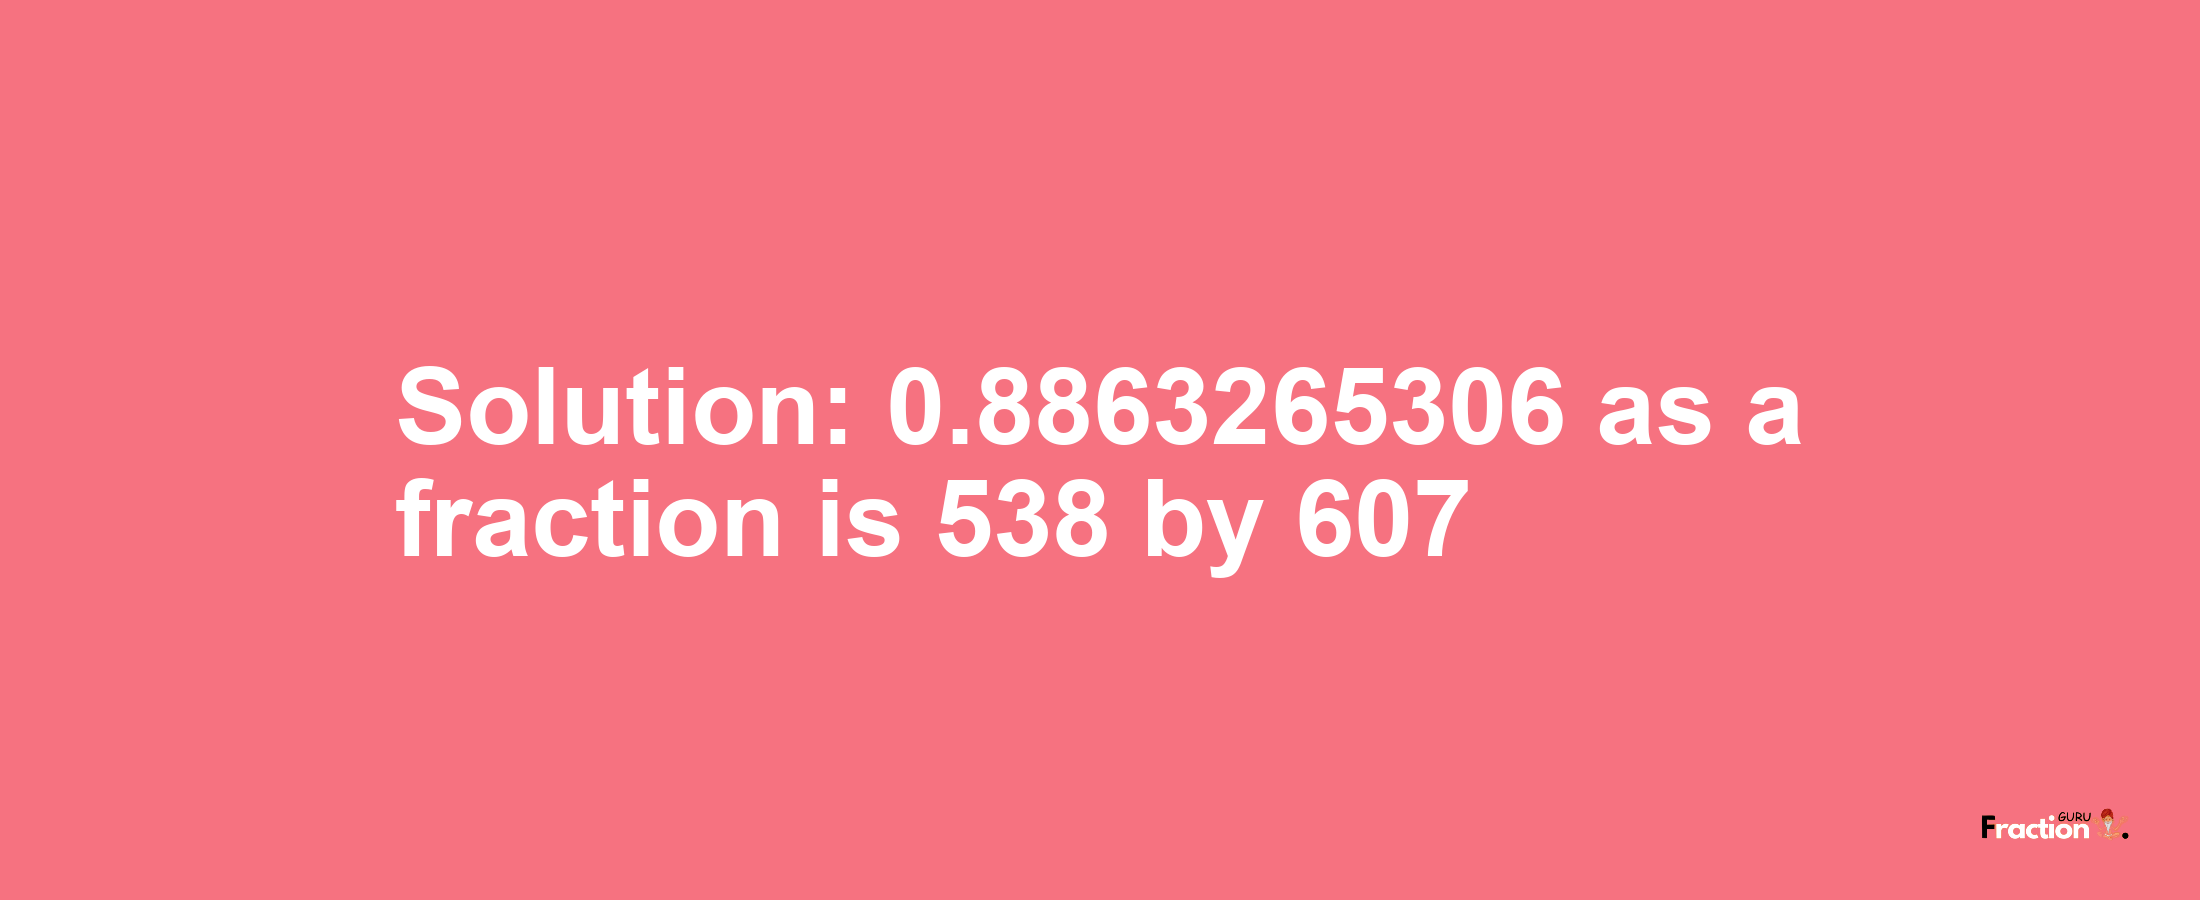 Solution:0.8863265306 as a fraction is 538/607